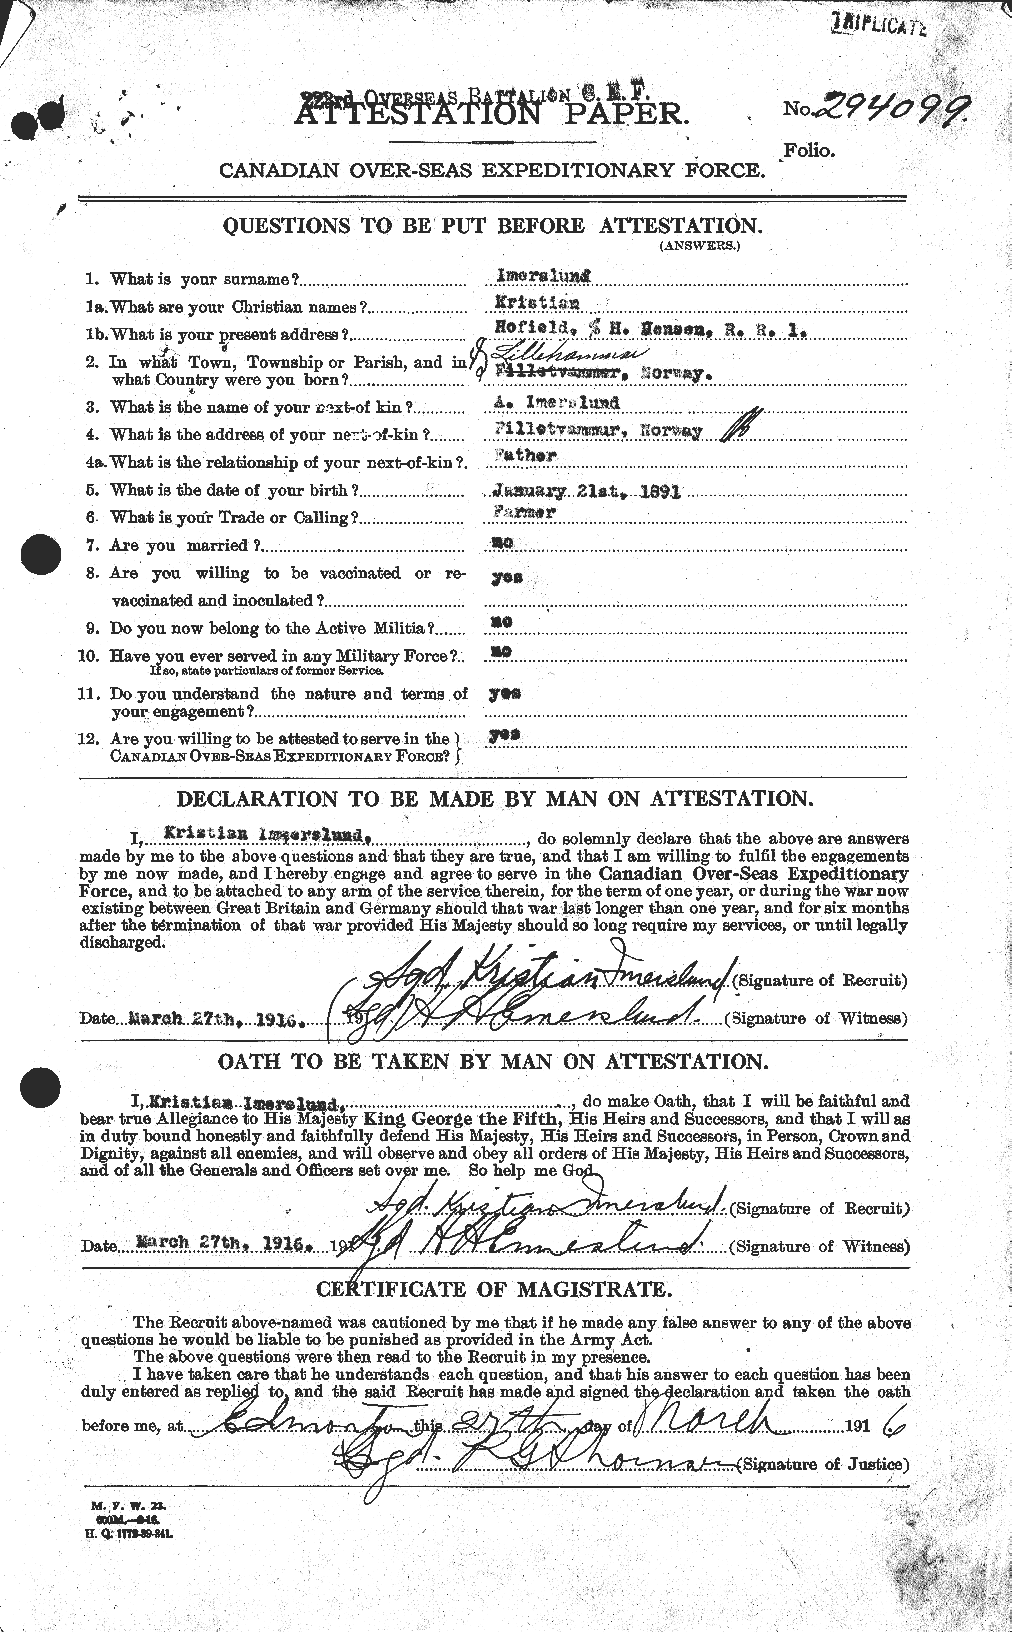 Personnel Records of the First World War - CEF 413359a